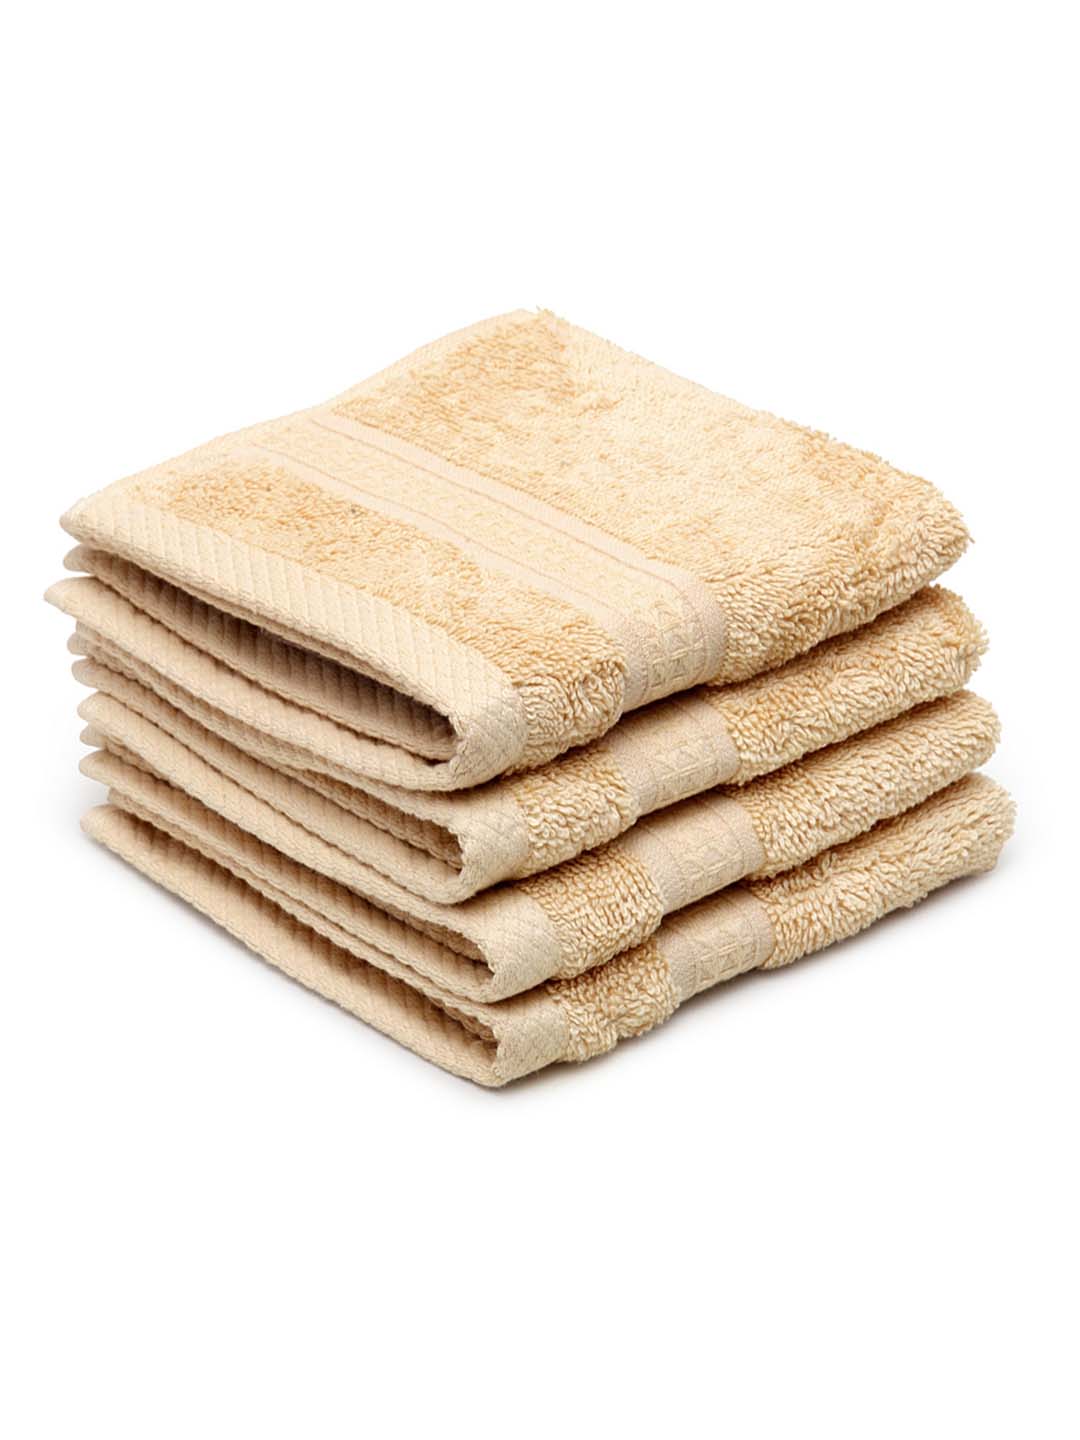 Spaces Organic 4 Pieces Face Towels (Brown)